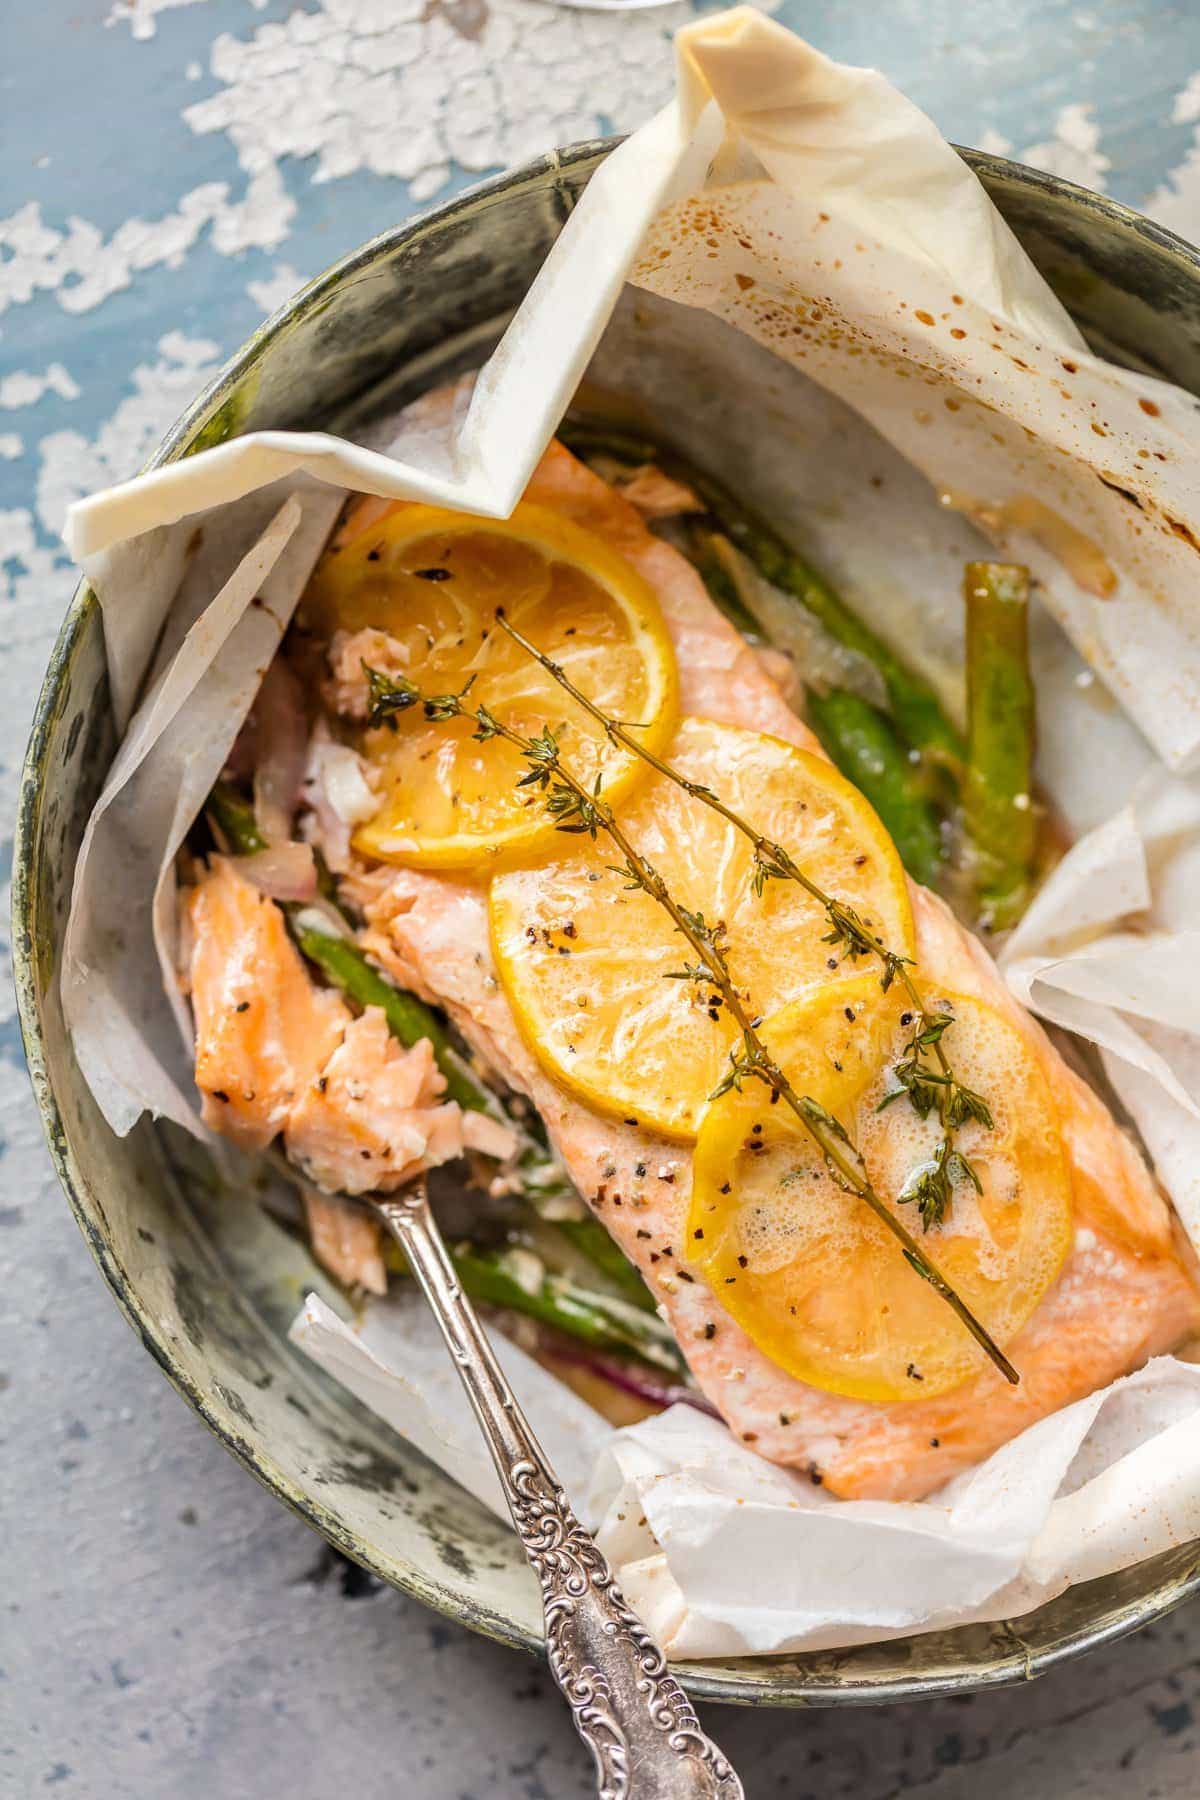 https://www.thecookierookie.com/wp-content/uploads/2017/02/lemon-butter-salmon-in-parchment-10-of-11.jpg